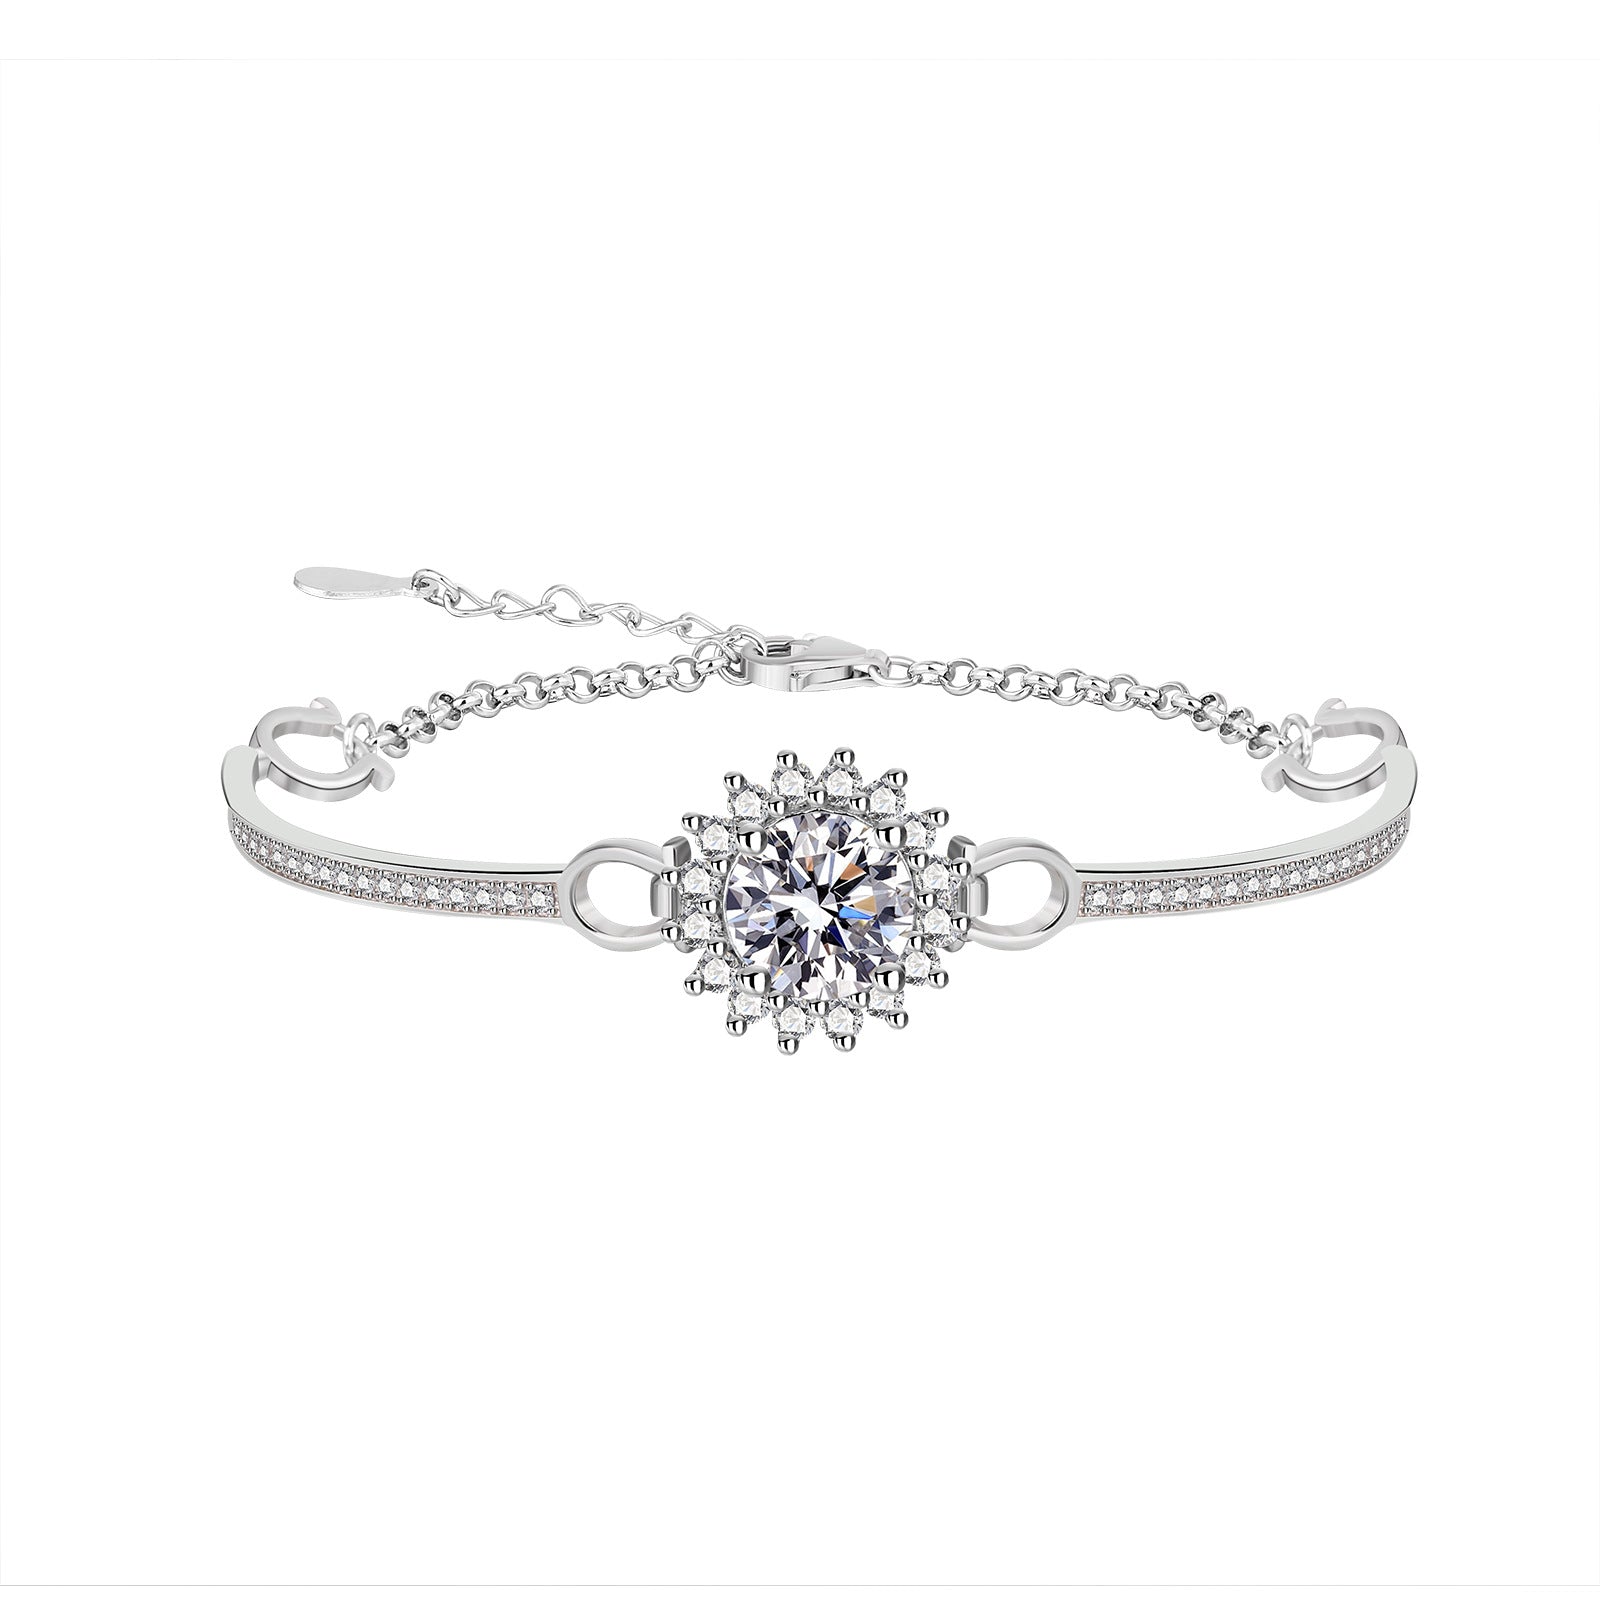 Gemstone Jewelry - 2 3/4 CT TGW Created Moissanite Bracelet In Sterling  Silver - Discounts for Veterans, VA employees and their families! |  Veterans Canteen Service